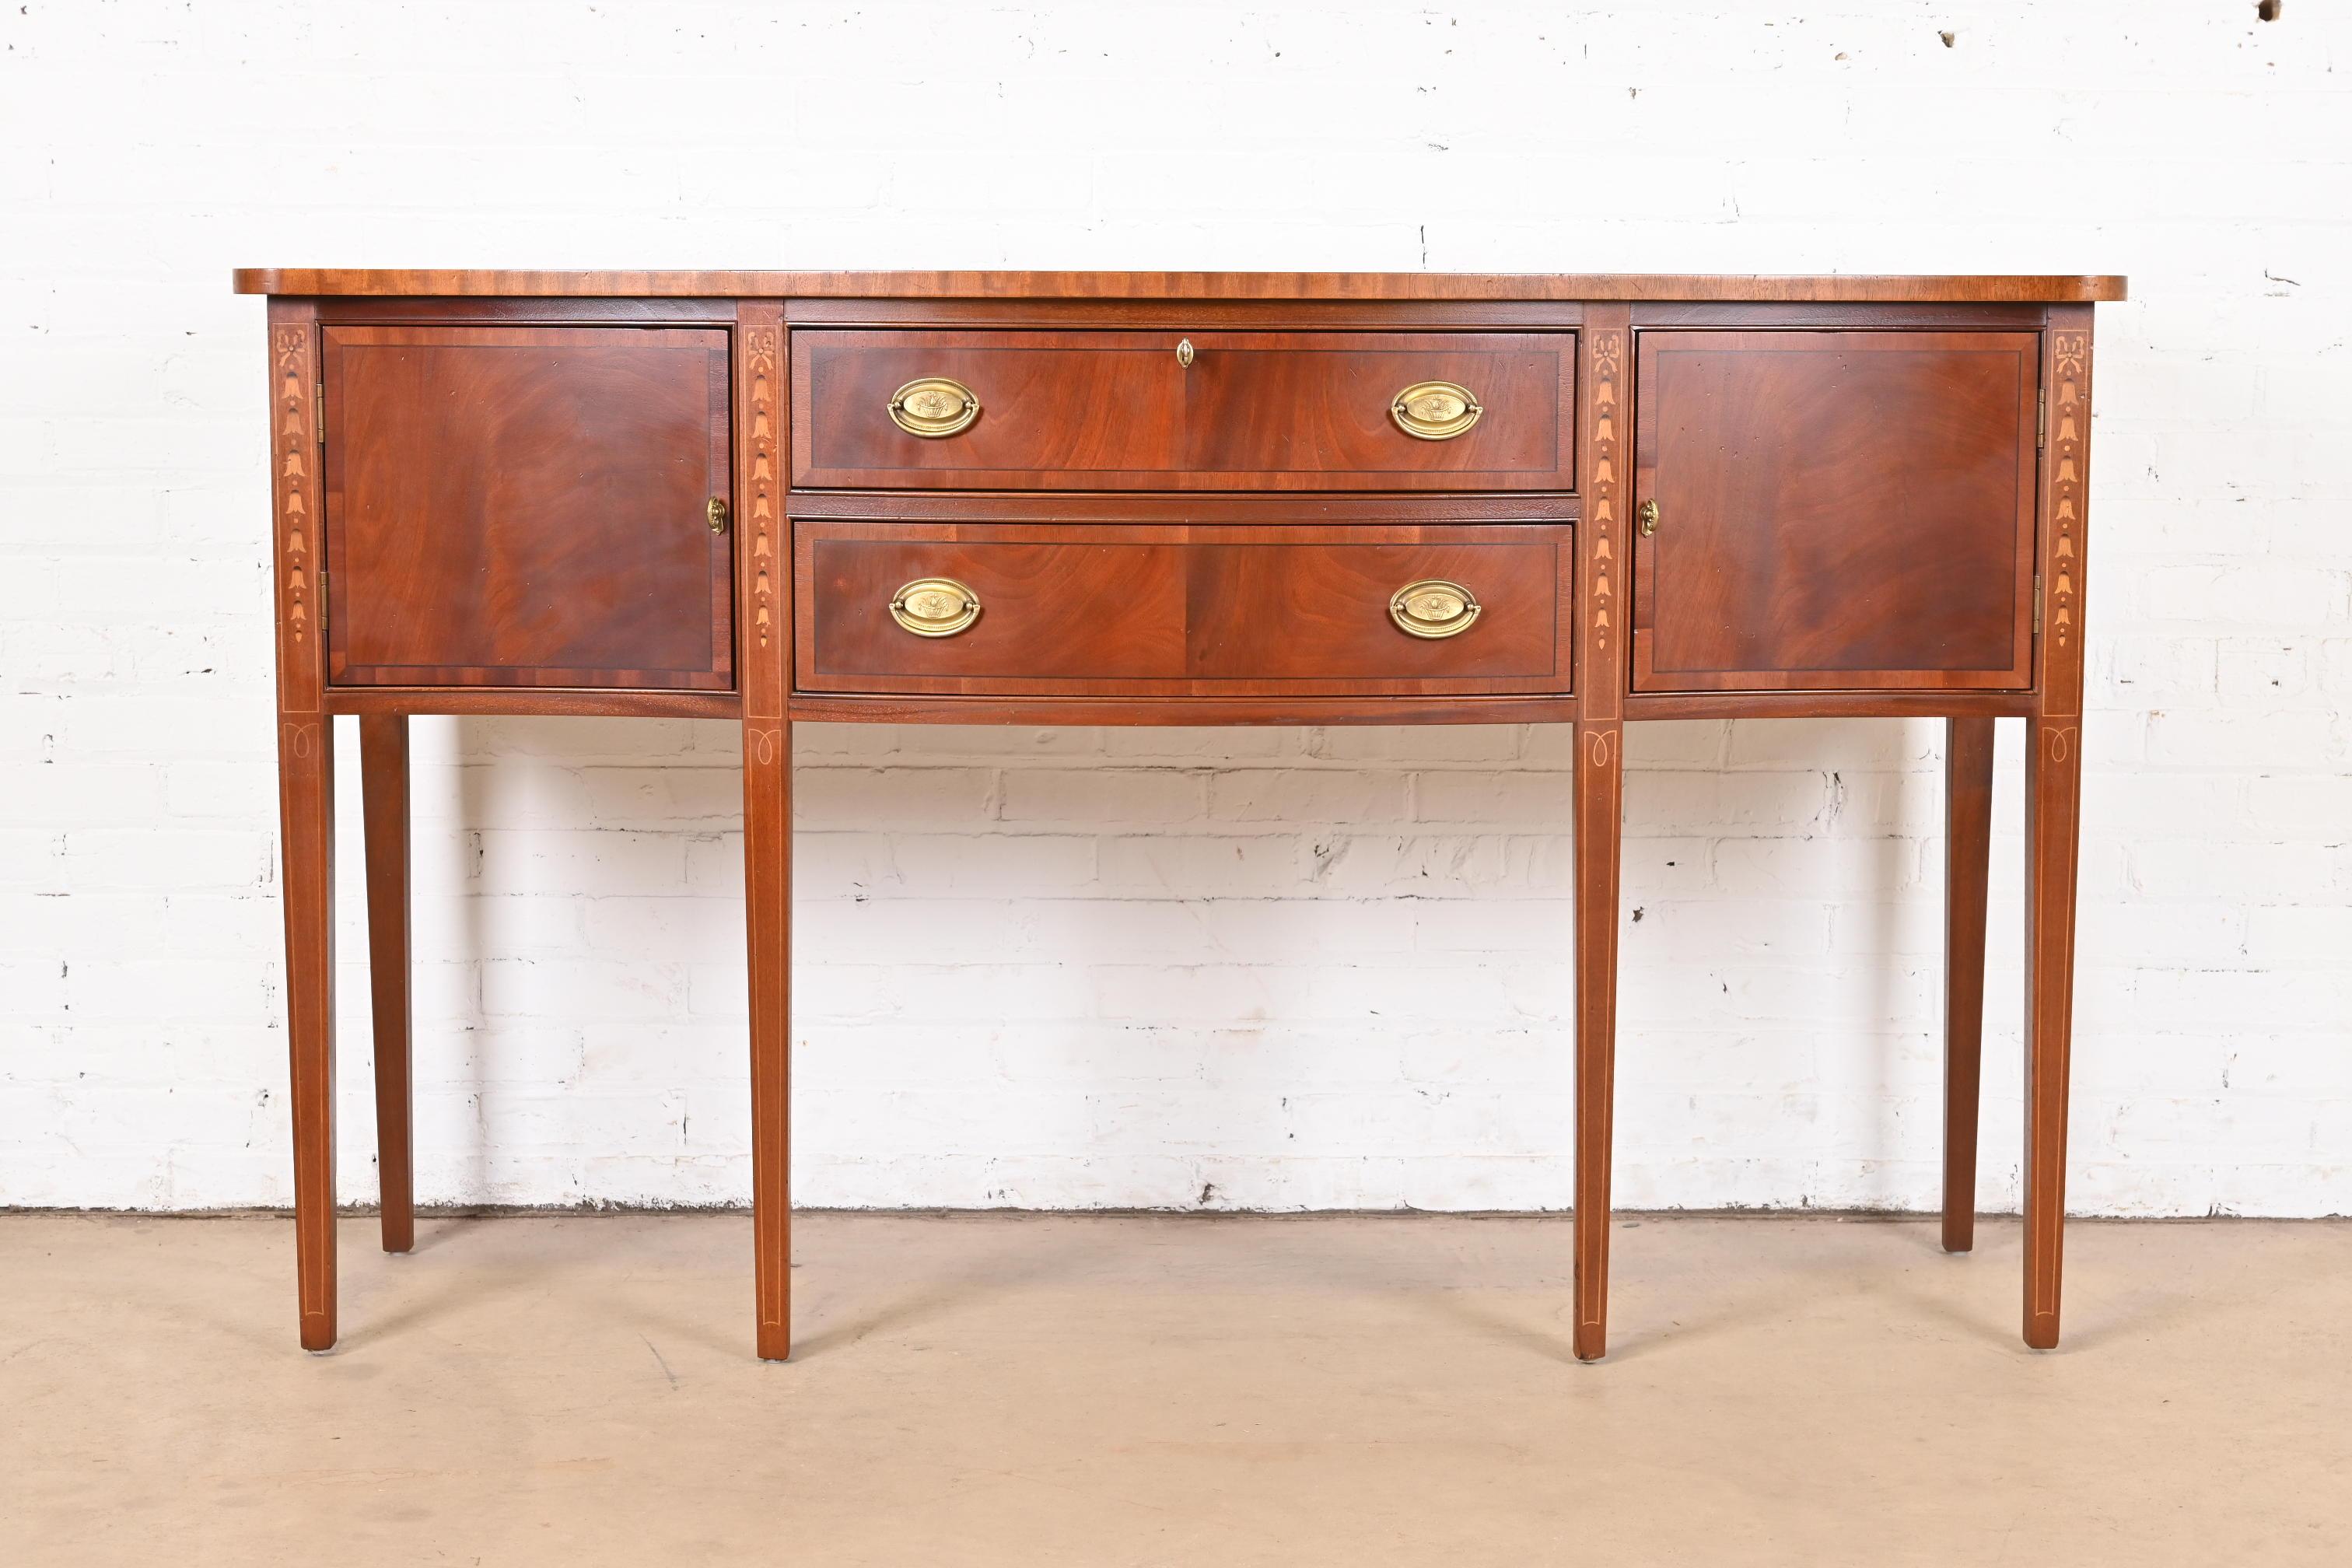 American Hepplewhite Inlaid Mahogany Serpentine Front Sideboard Buffet or Credenza For Sale